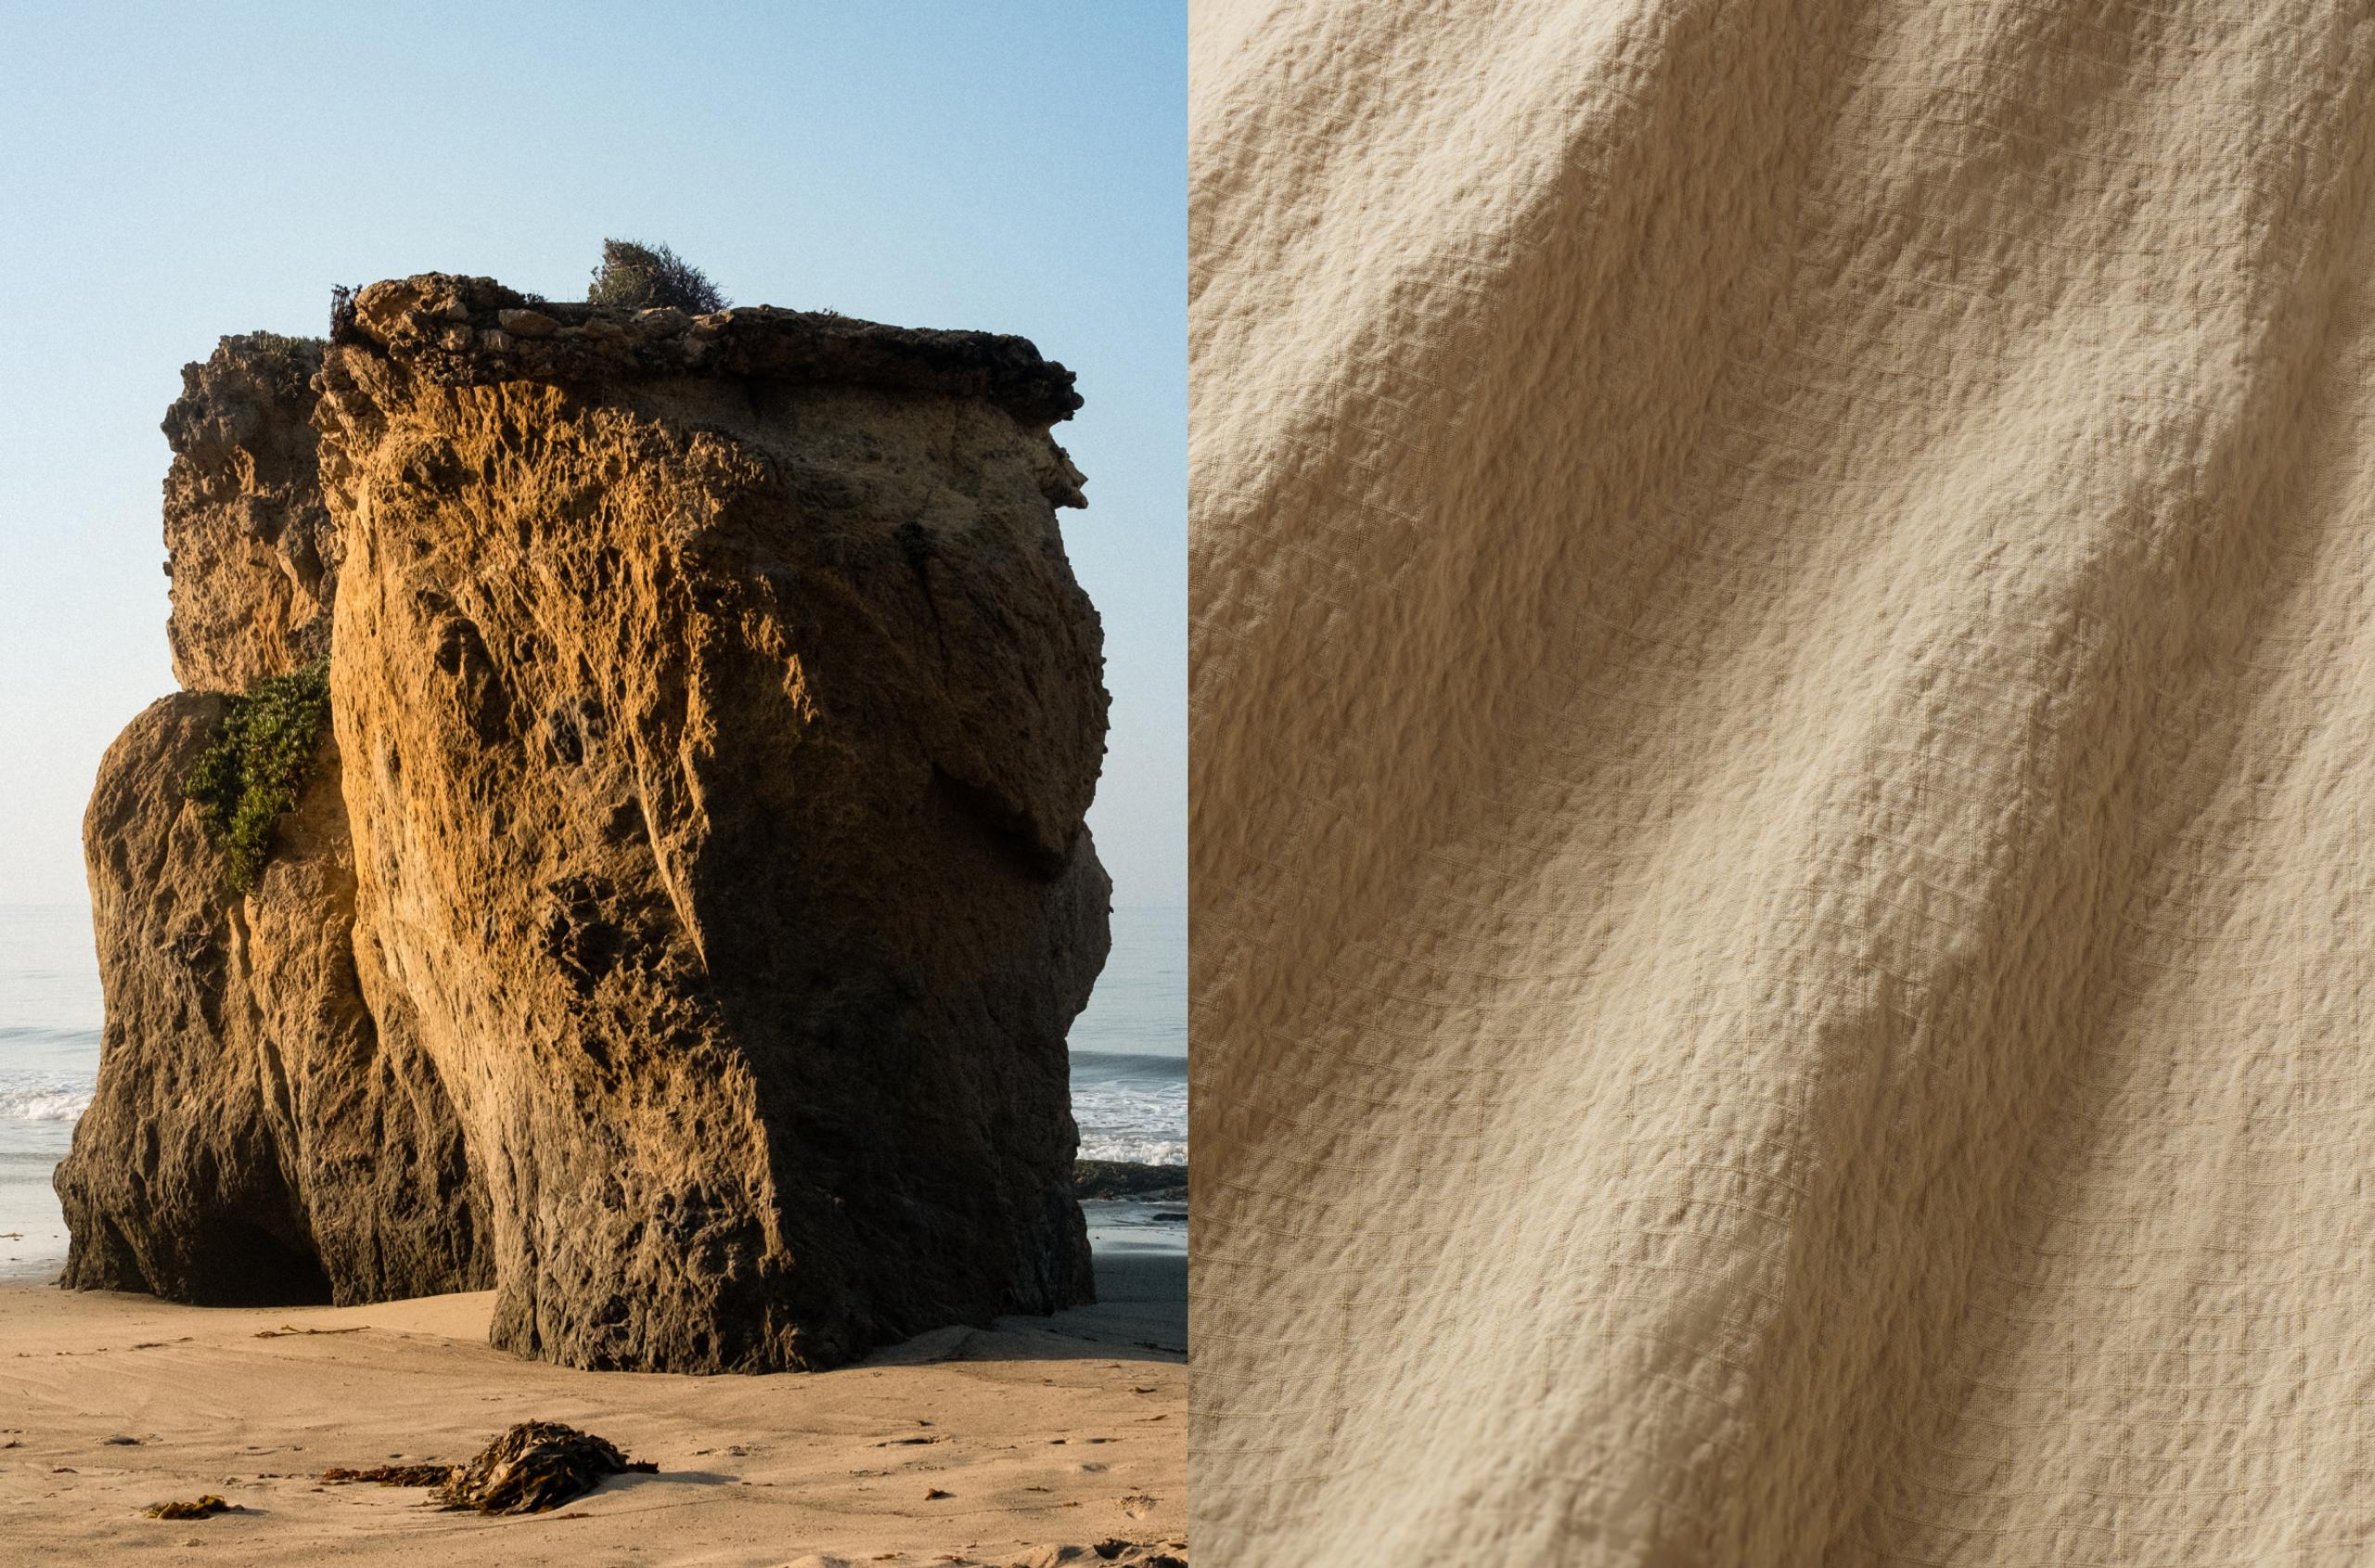 Closeup view of Harrier Anorak desert tan fabric juxtaposed next to old boulder formation on a beach alongside the Pacific Ocean